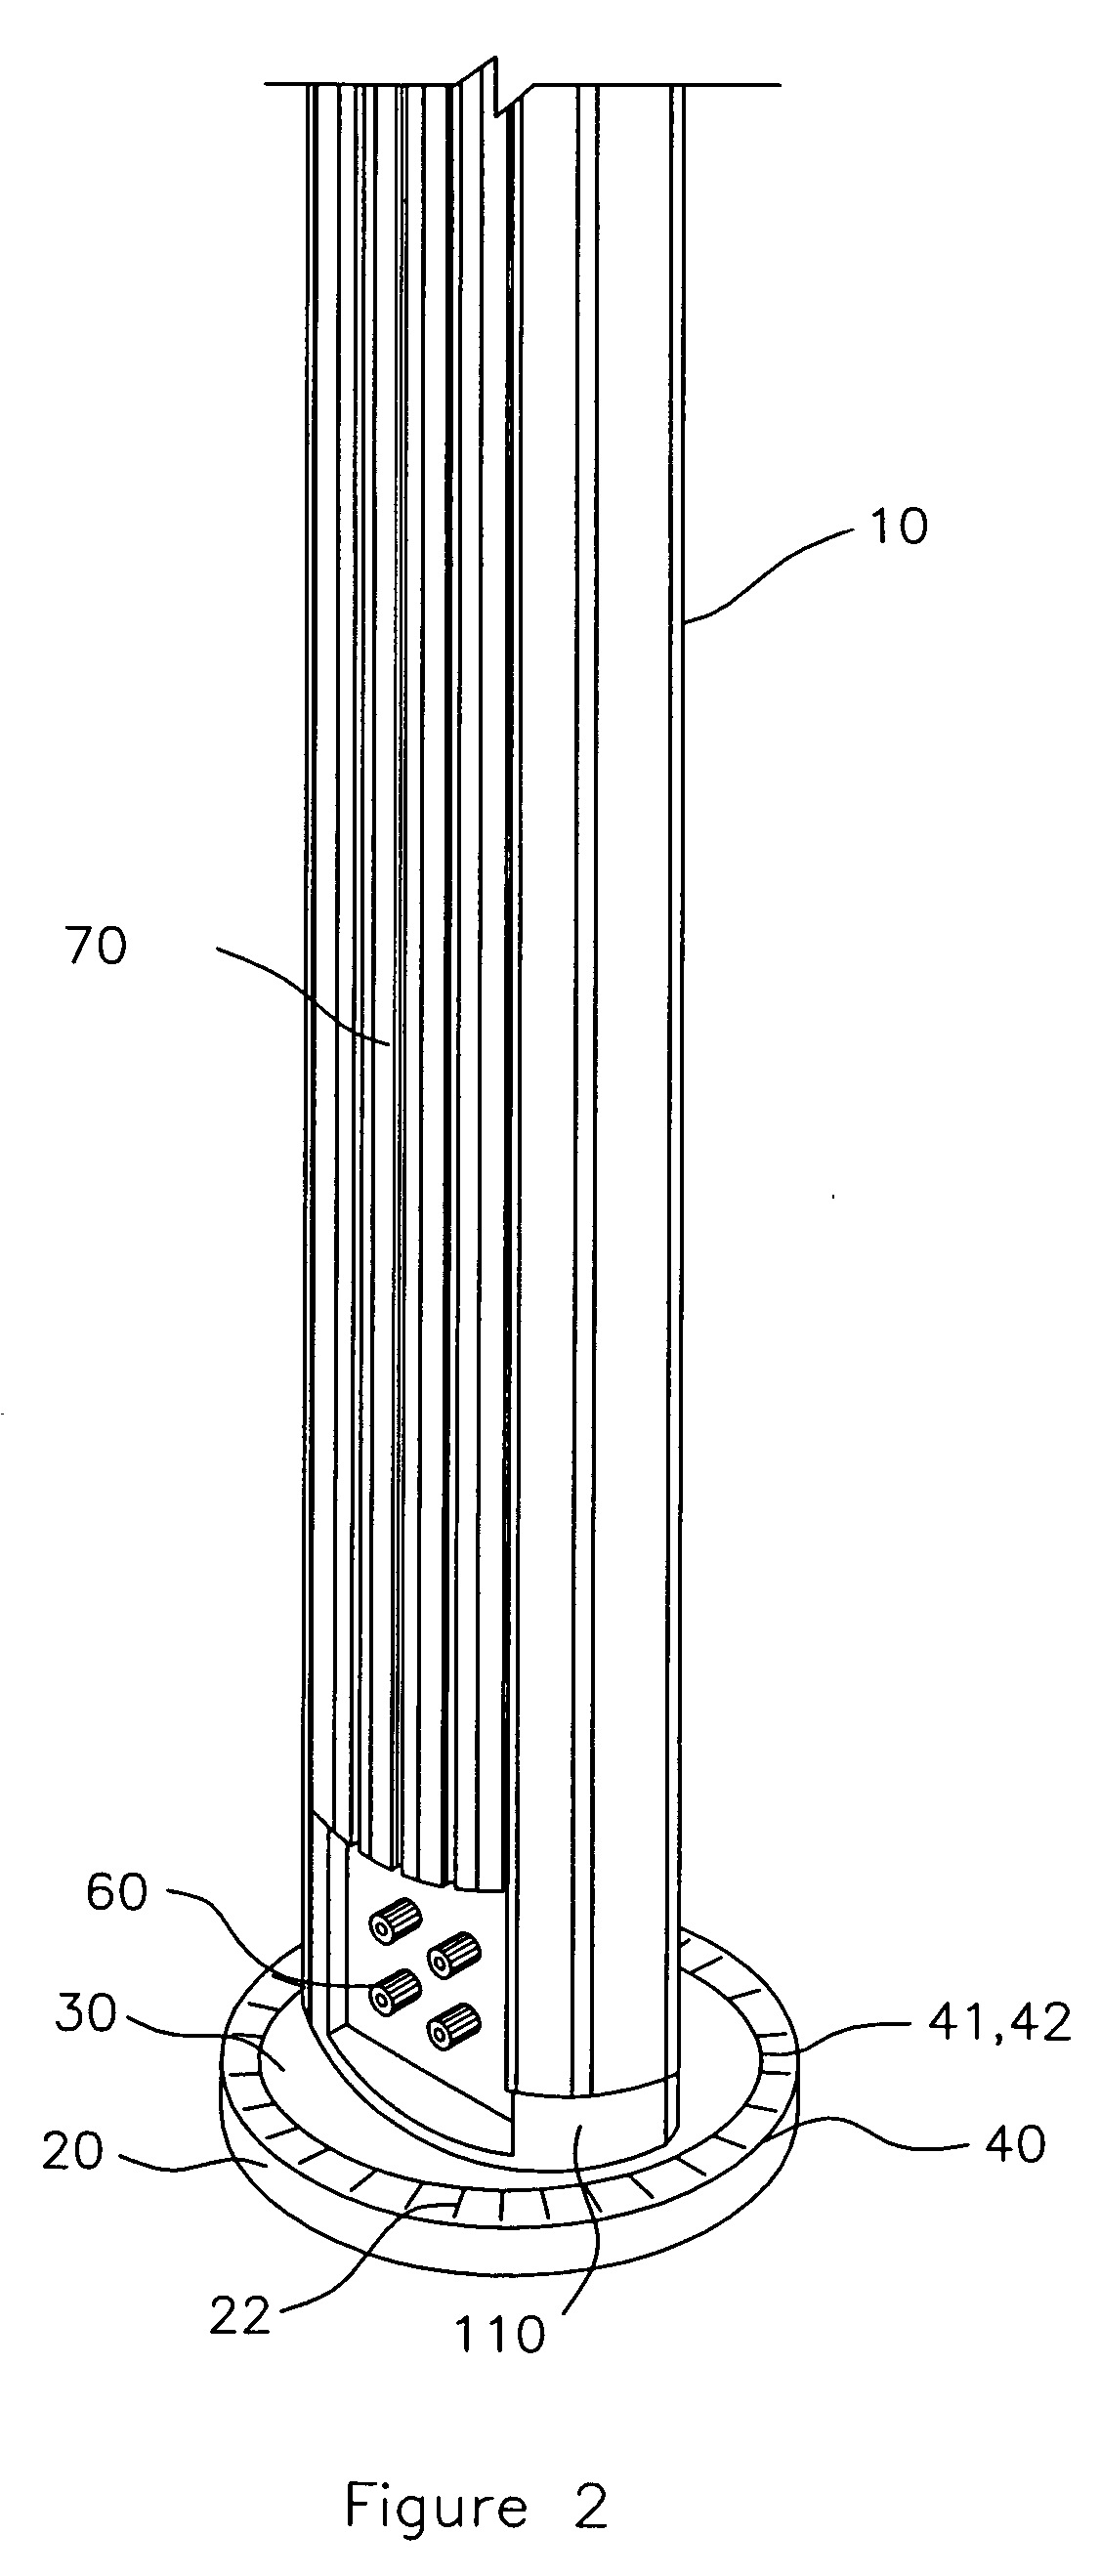 Surround sound positioning tower system and method